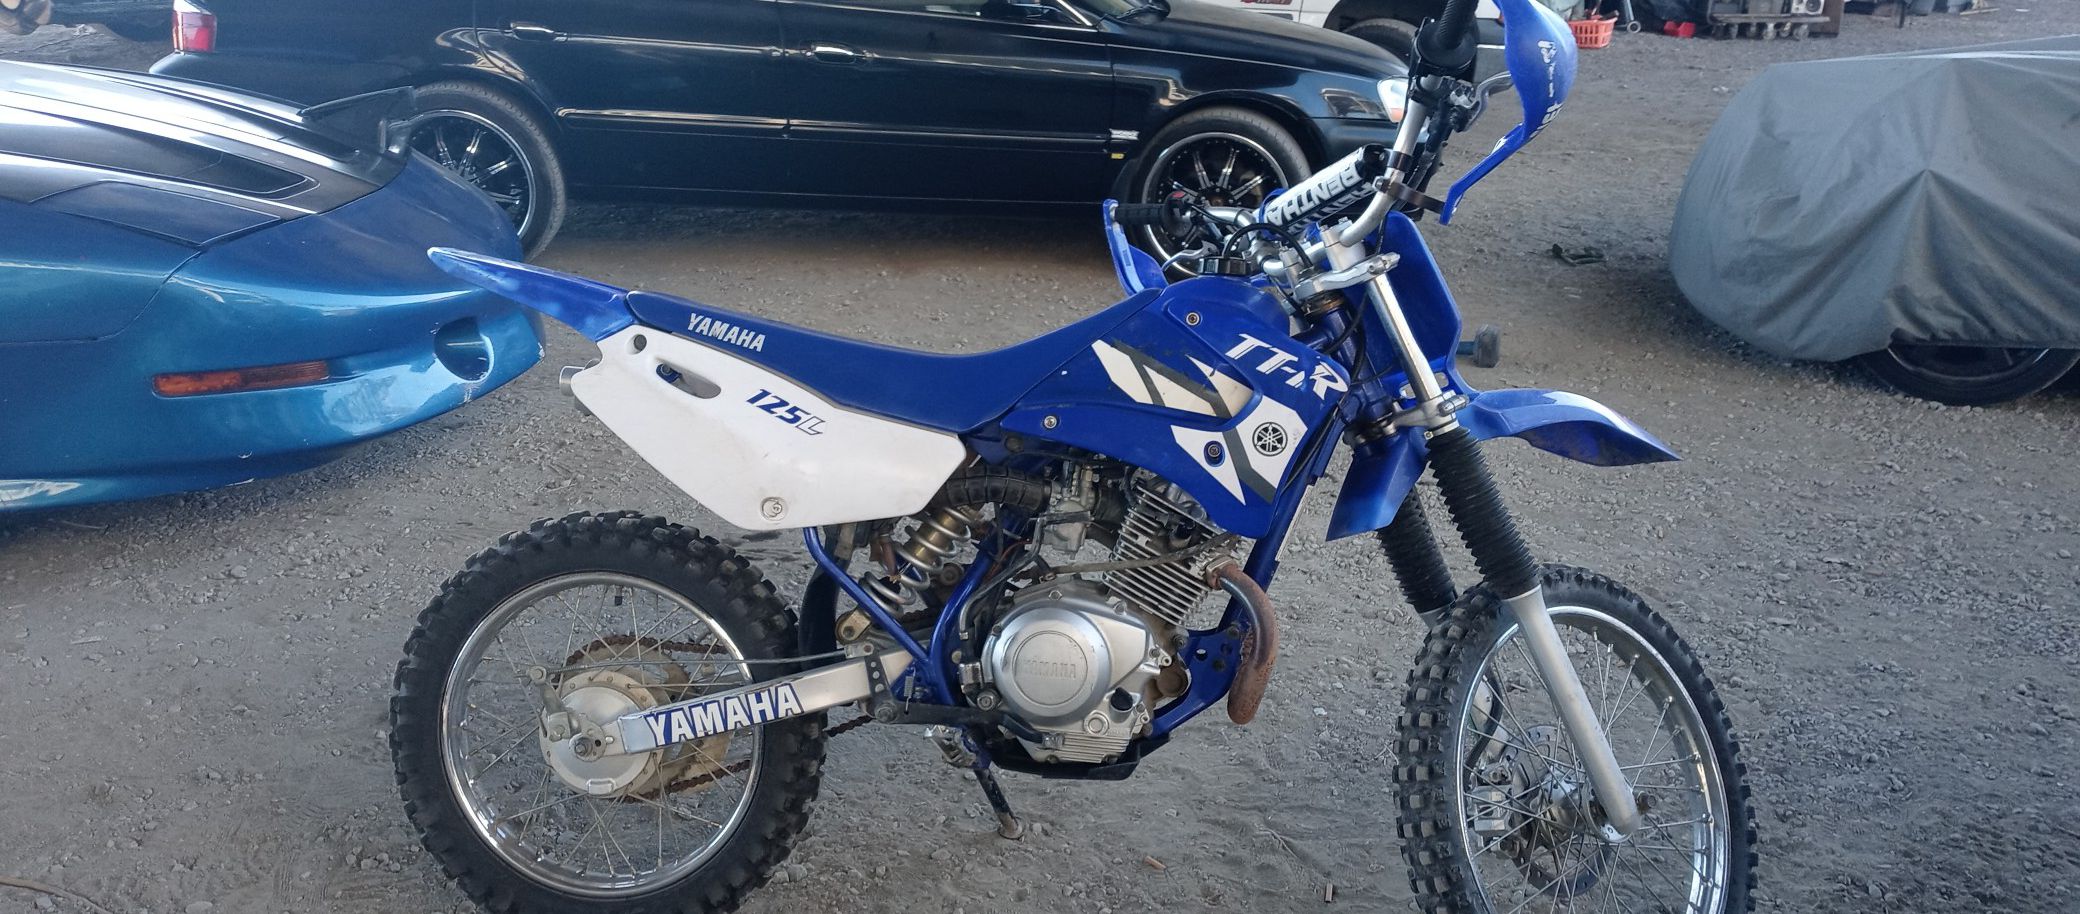 Yamaha TTR125L runs good asking price is $1400.00 with paperwork